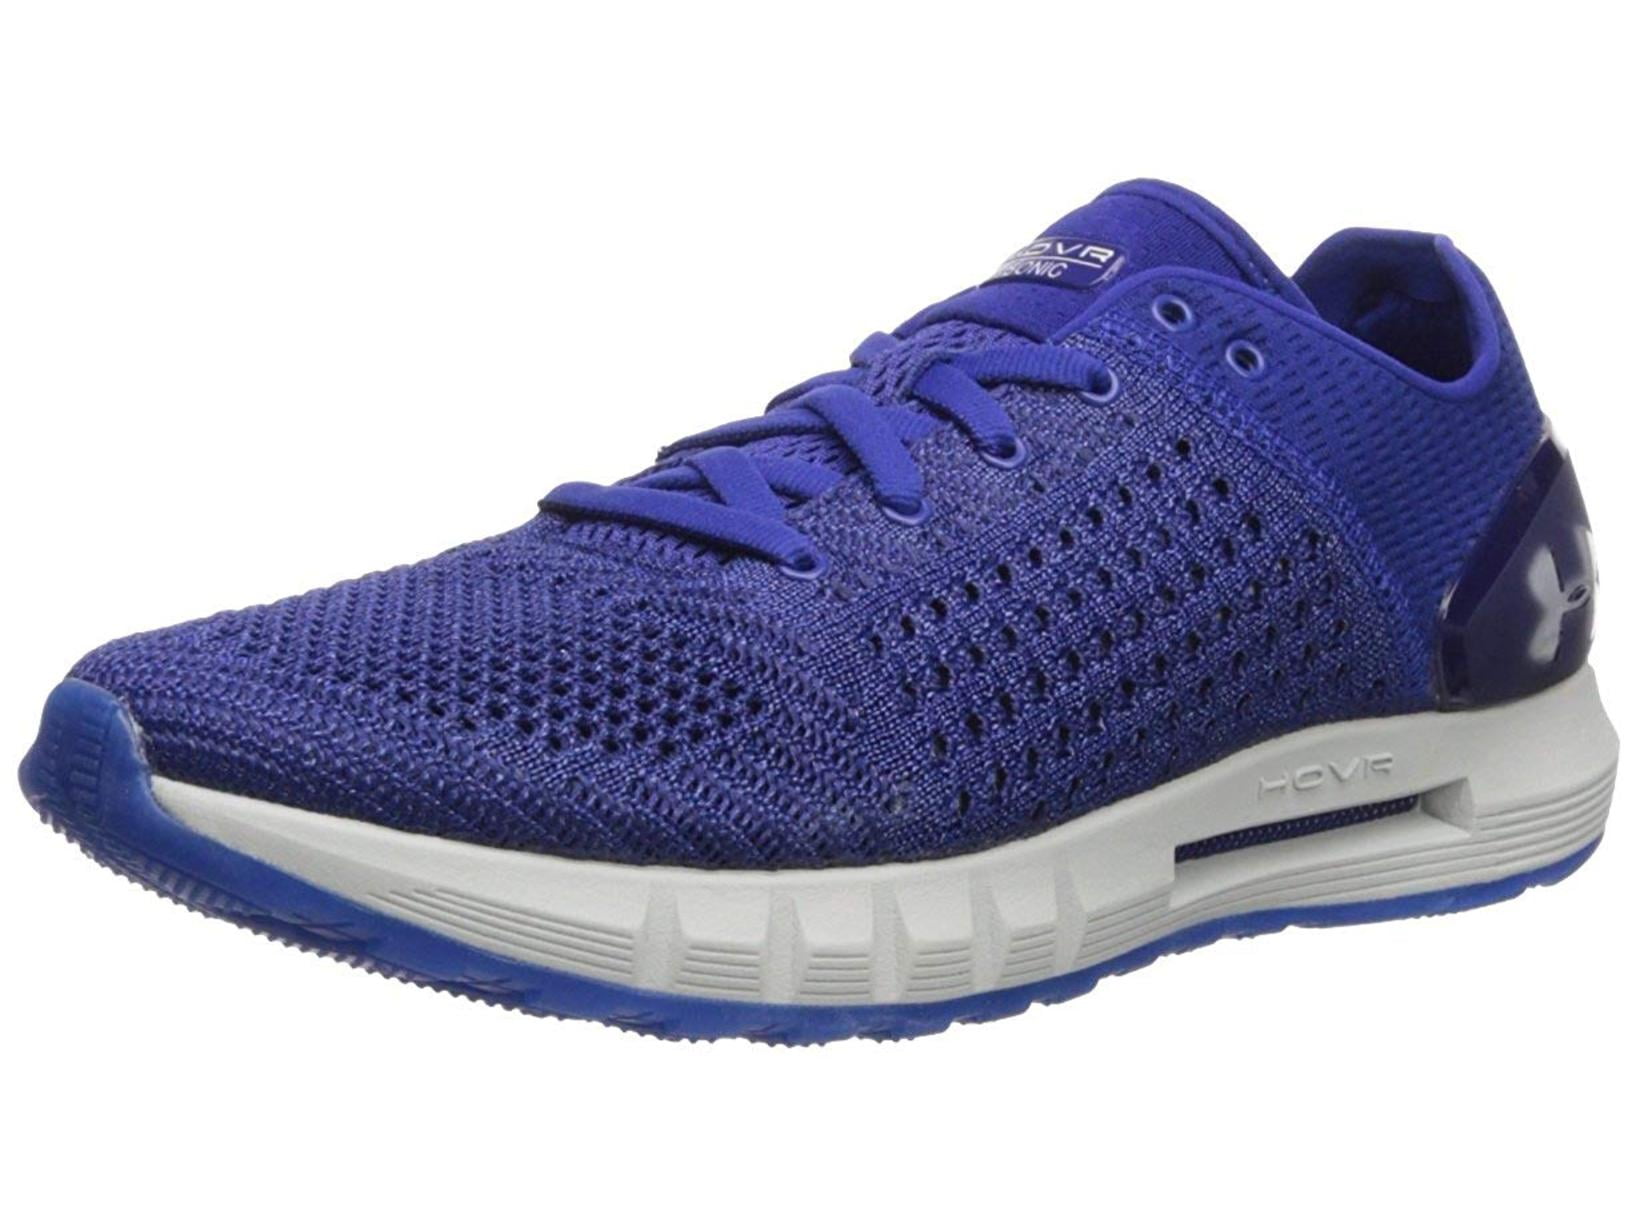 Under Armour - Under Armour Women's HOVR Sonic NC Running Shoe ...